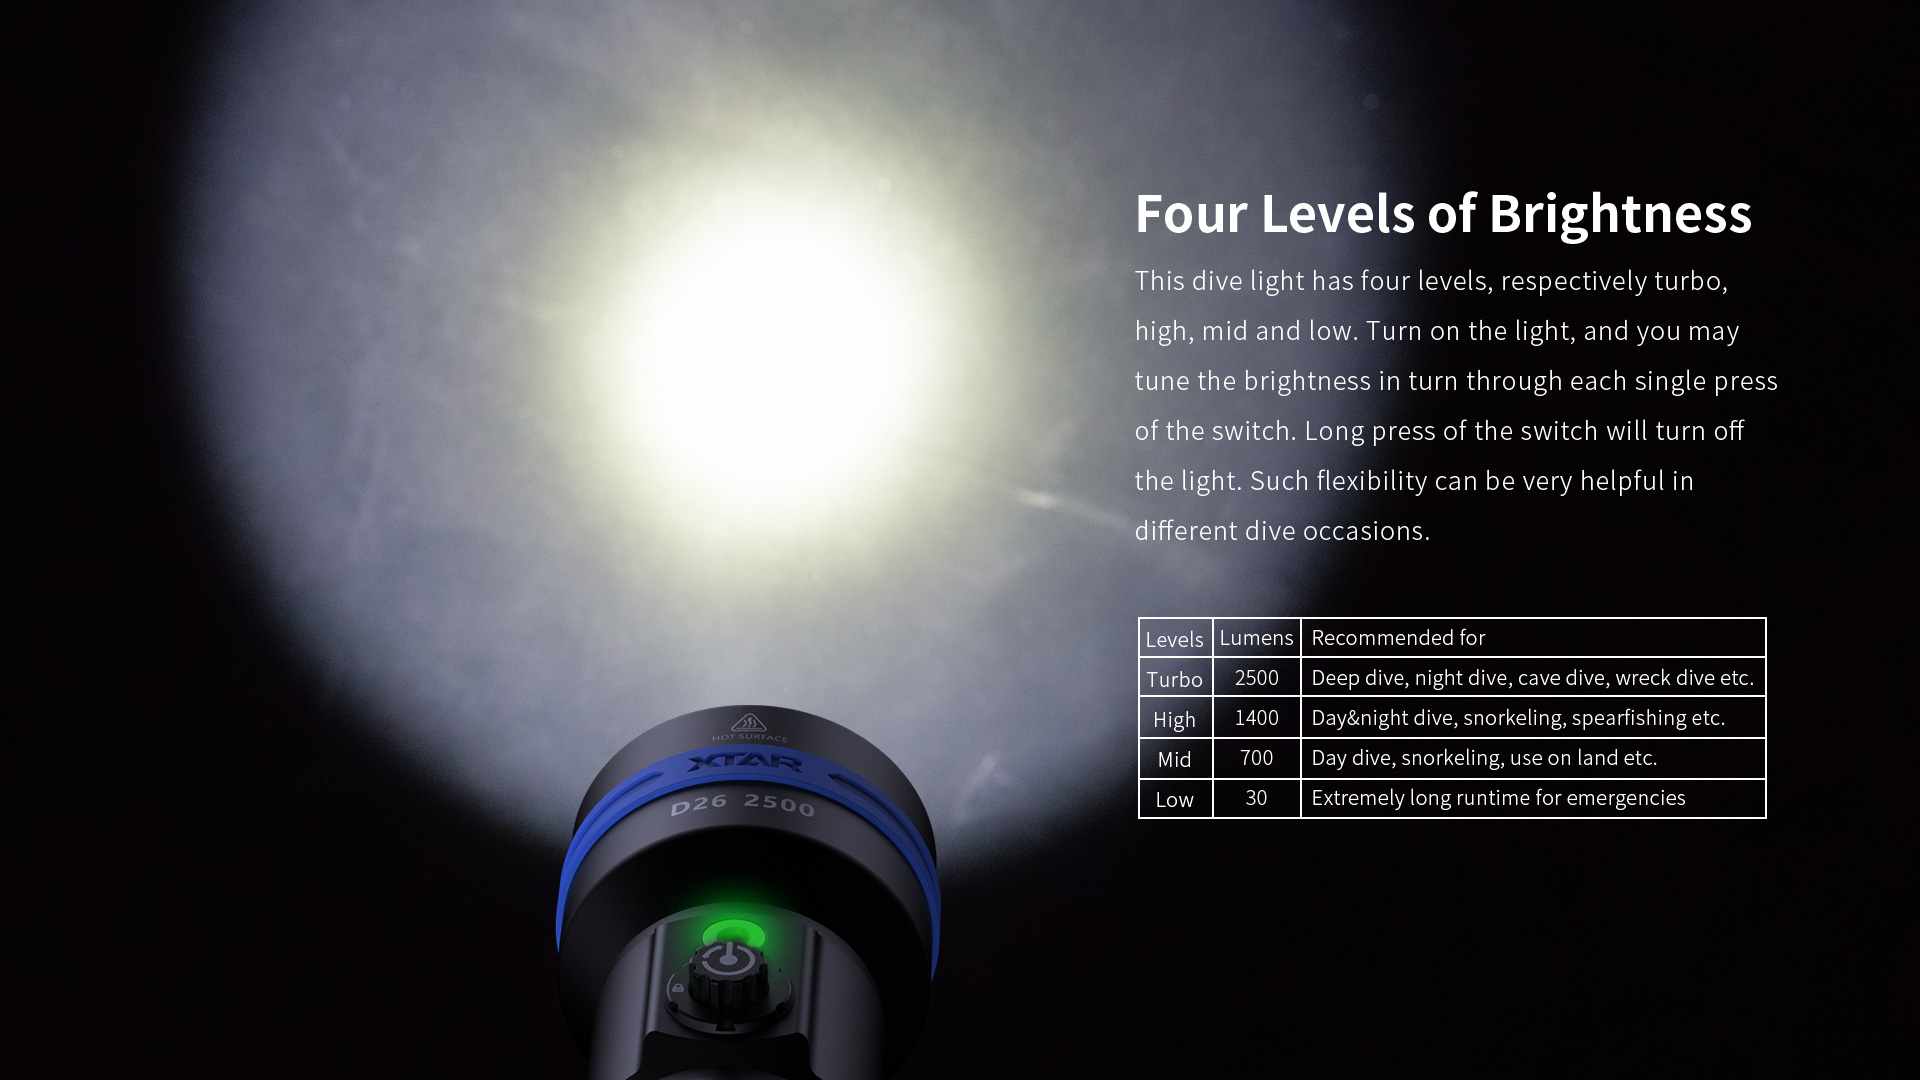 D26 2500 dive light has four lighting levels. Turbo 2500lm, high 1400lm, mid 700lm and low 30lm.